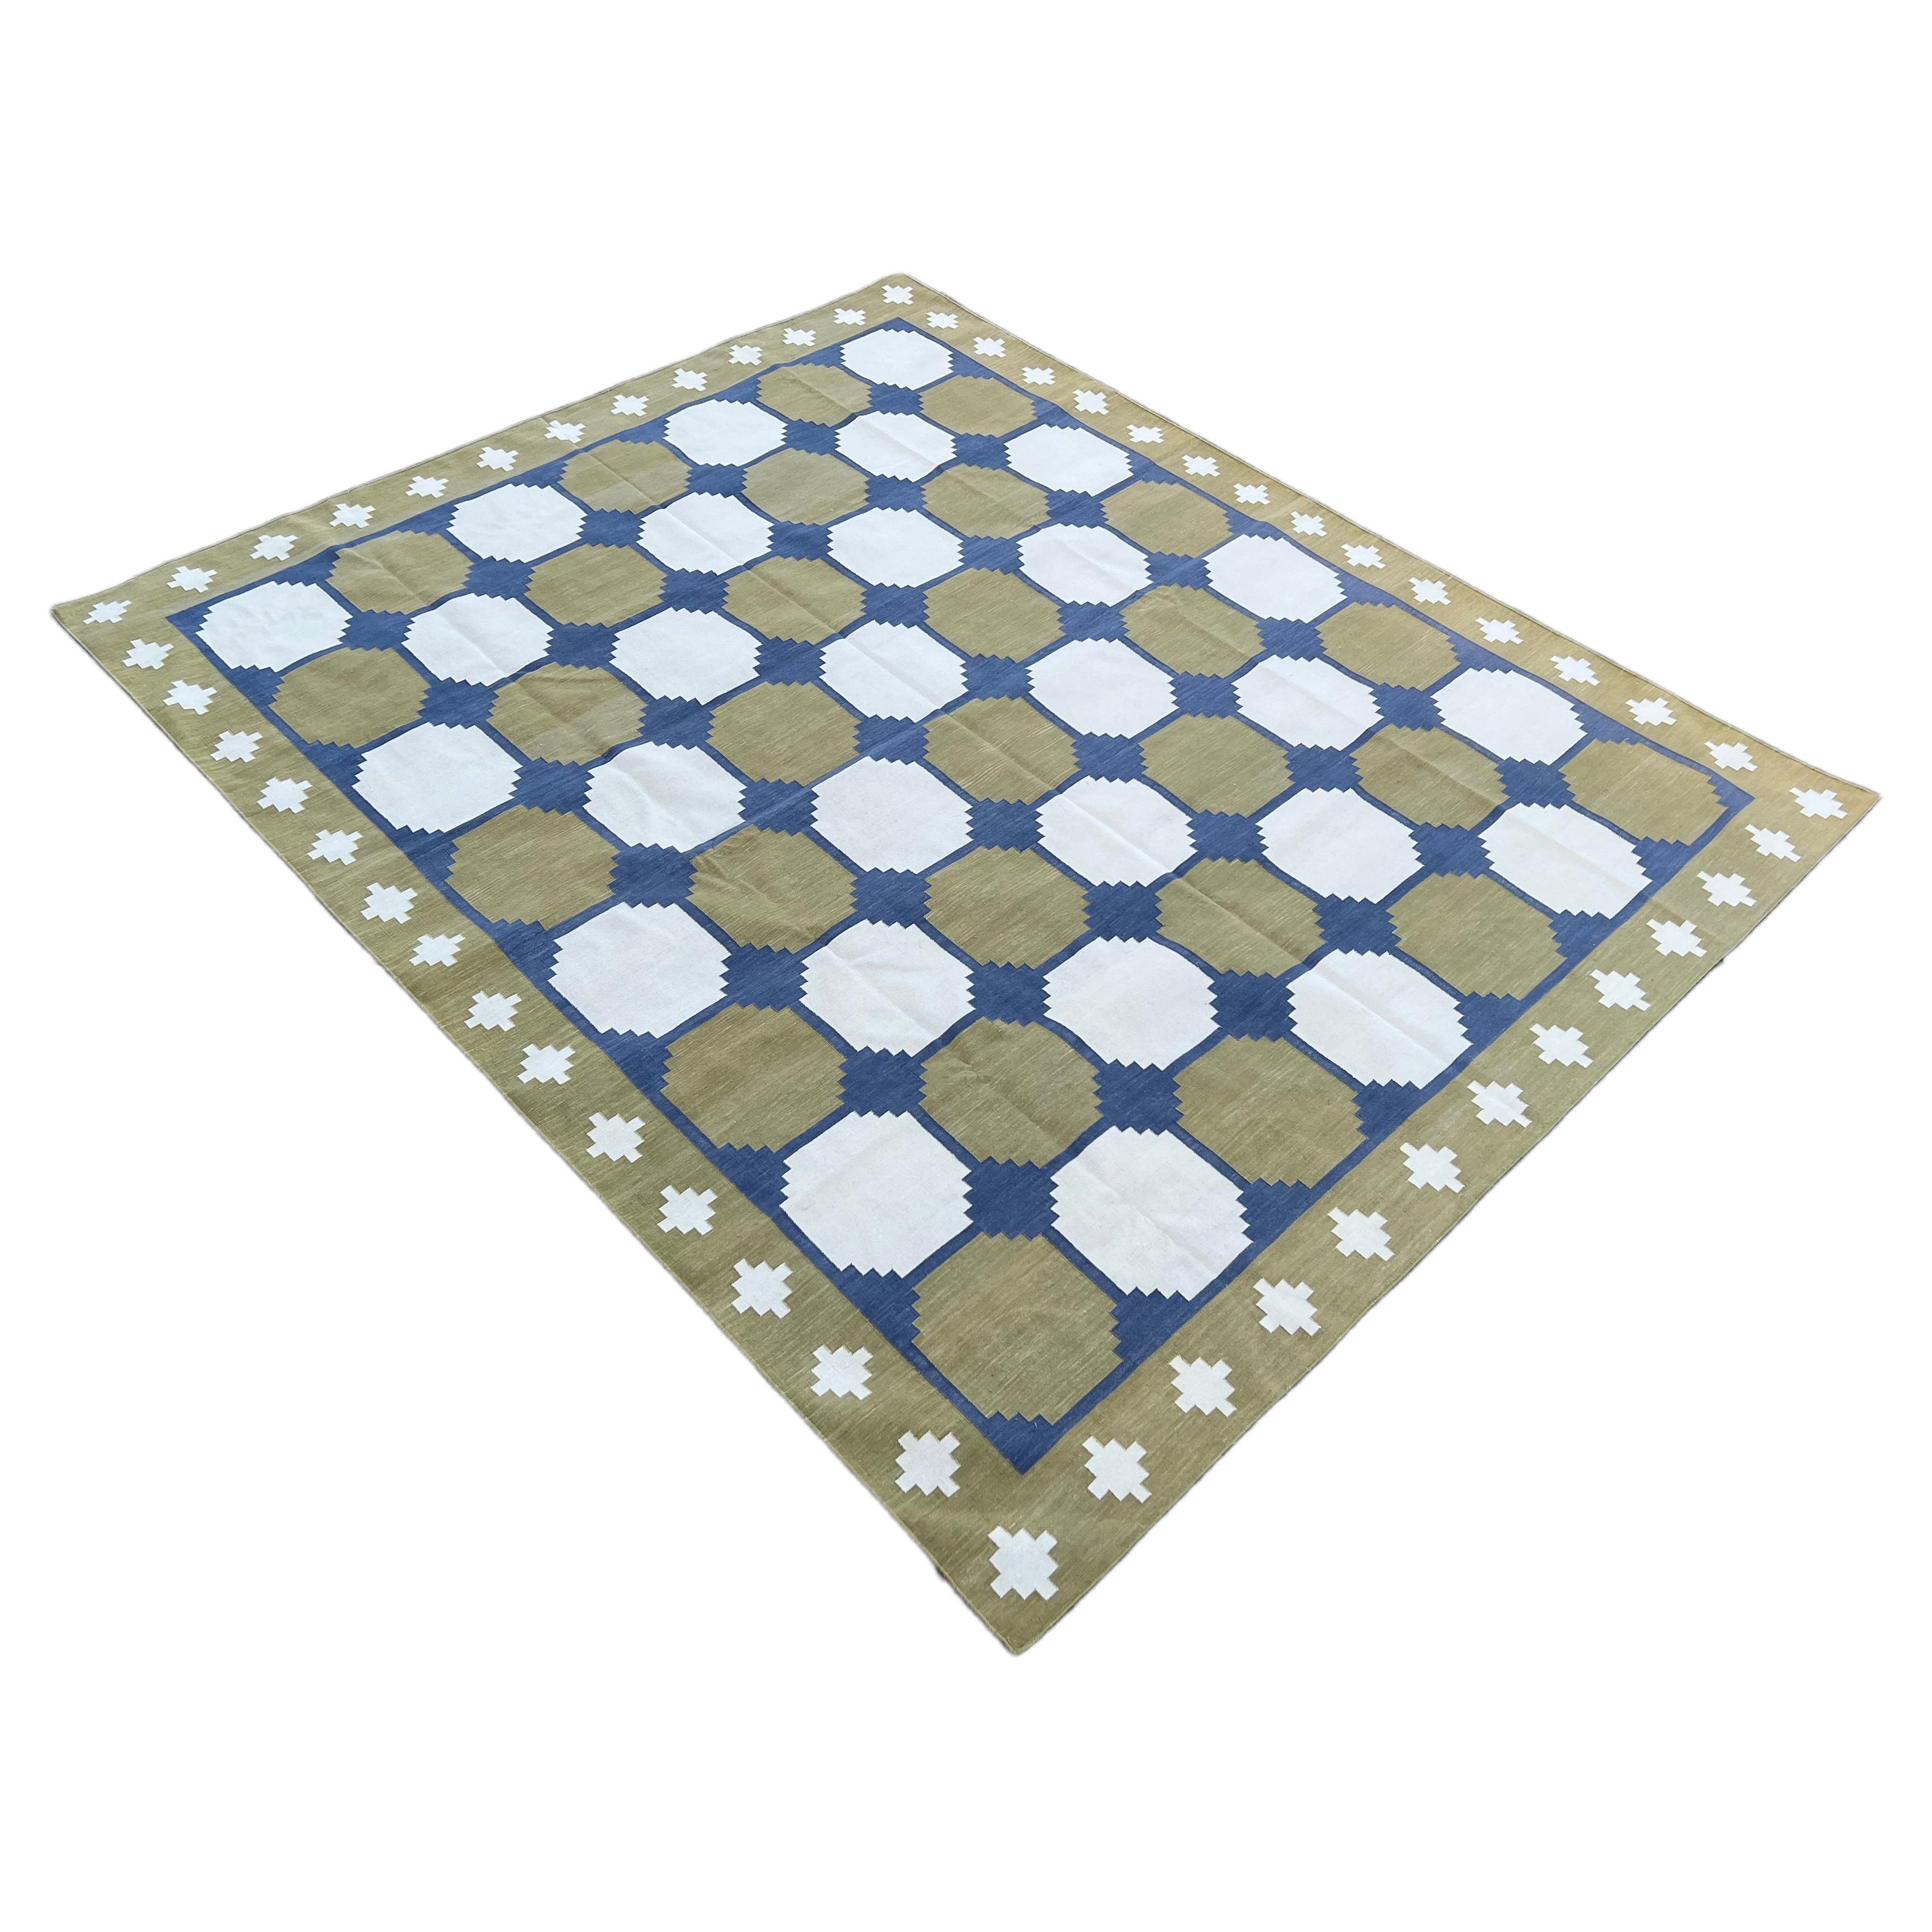 Handmade Cotton Area Flat Weave Rug, Green & Blue Geometric Tile Indian Dhurrie For Sale